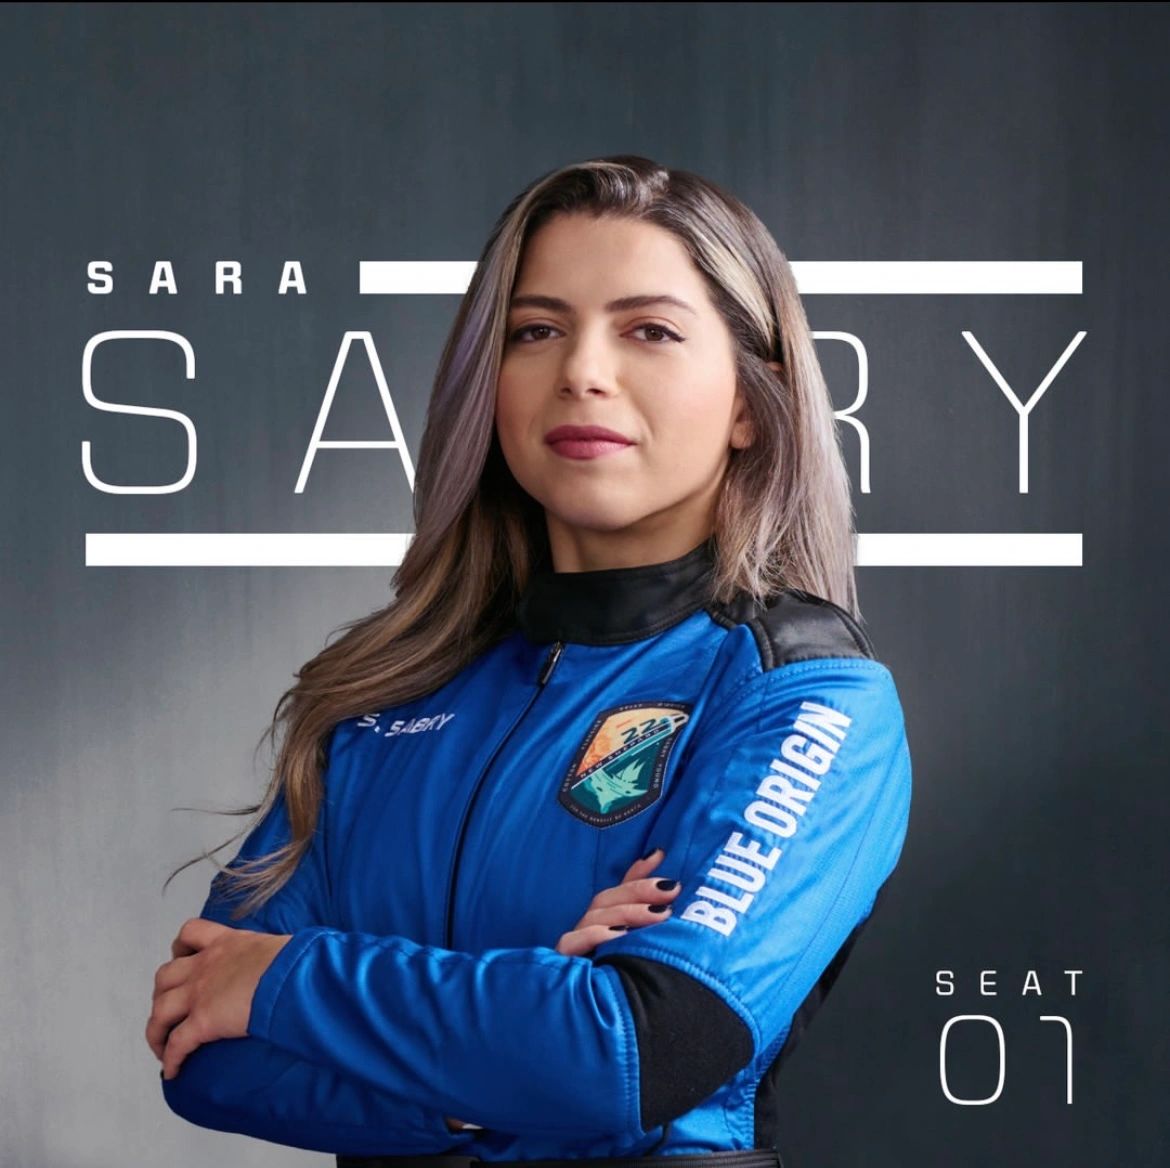 Sara Sabry 
Egyptian Astronaut 
First African woman in space 
First Arab Woman in Space